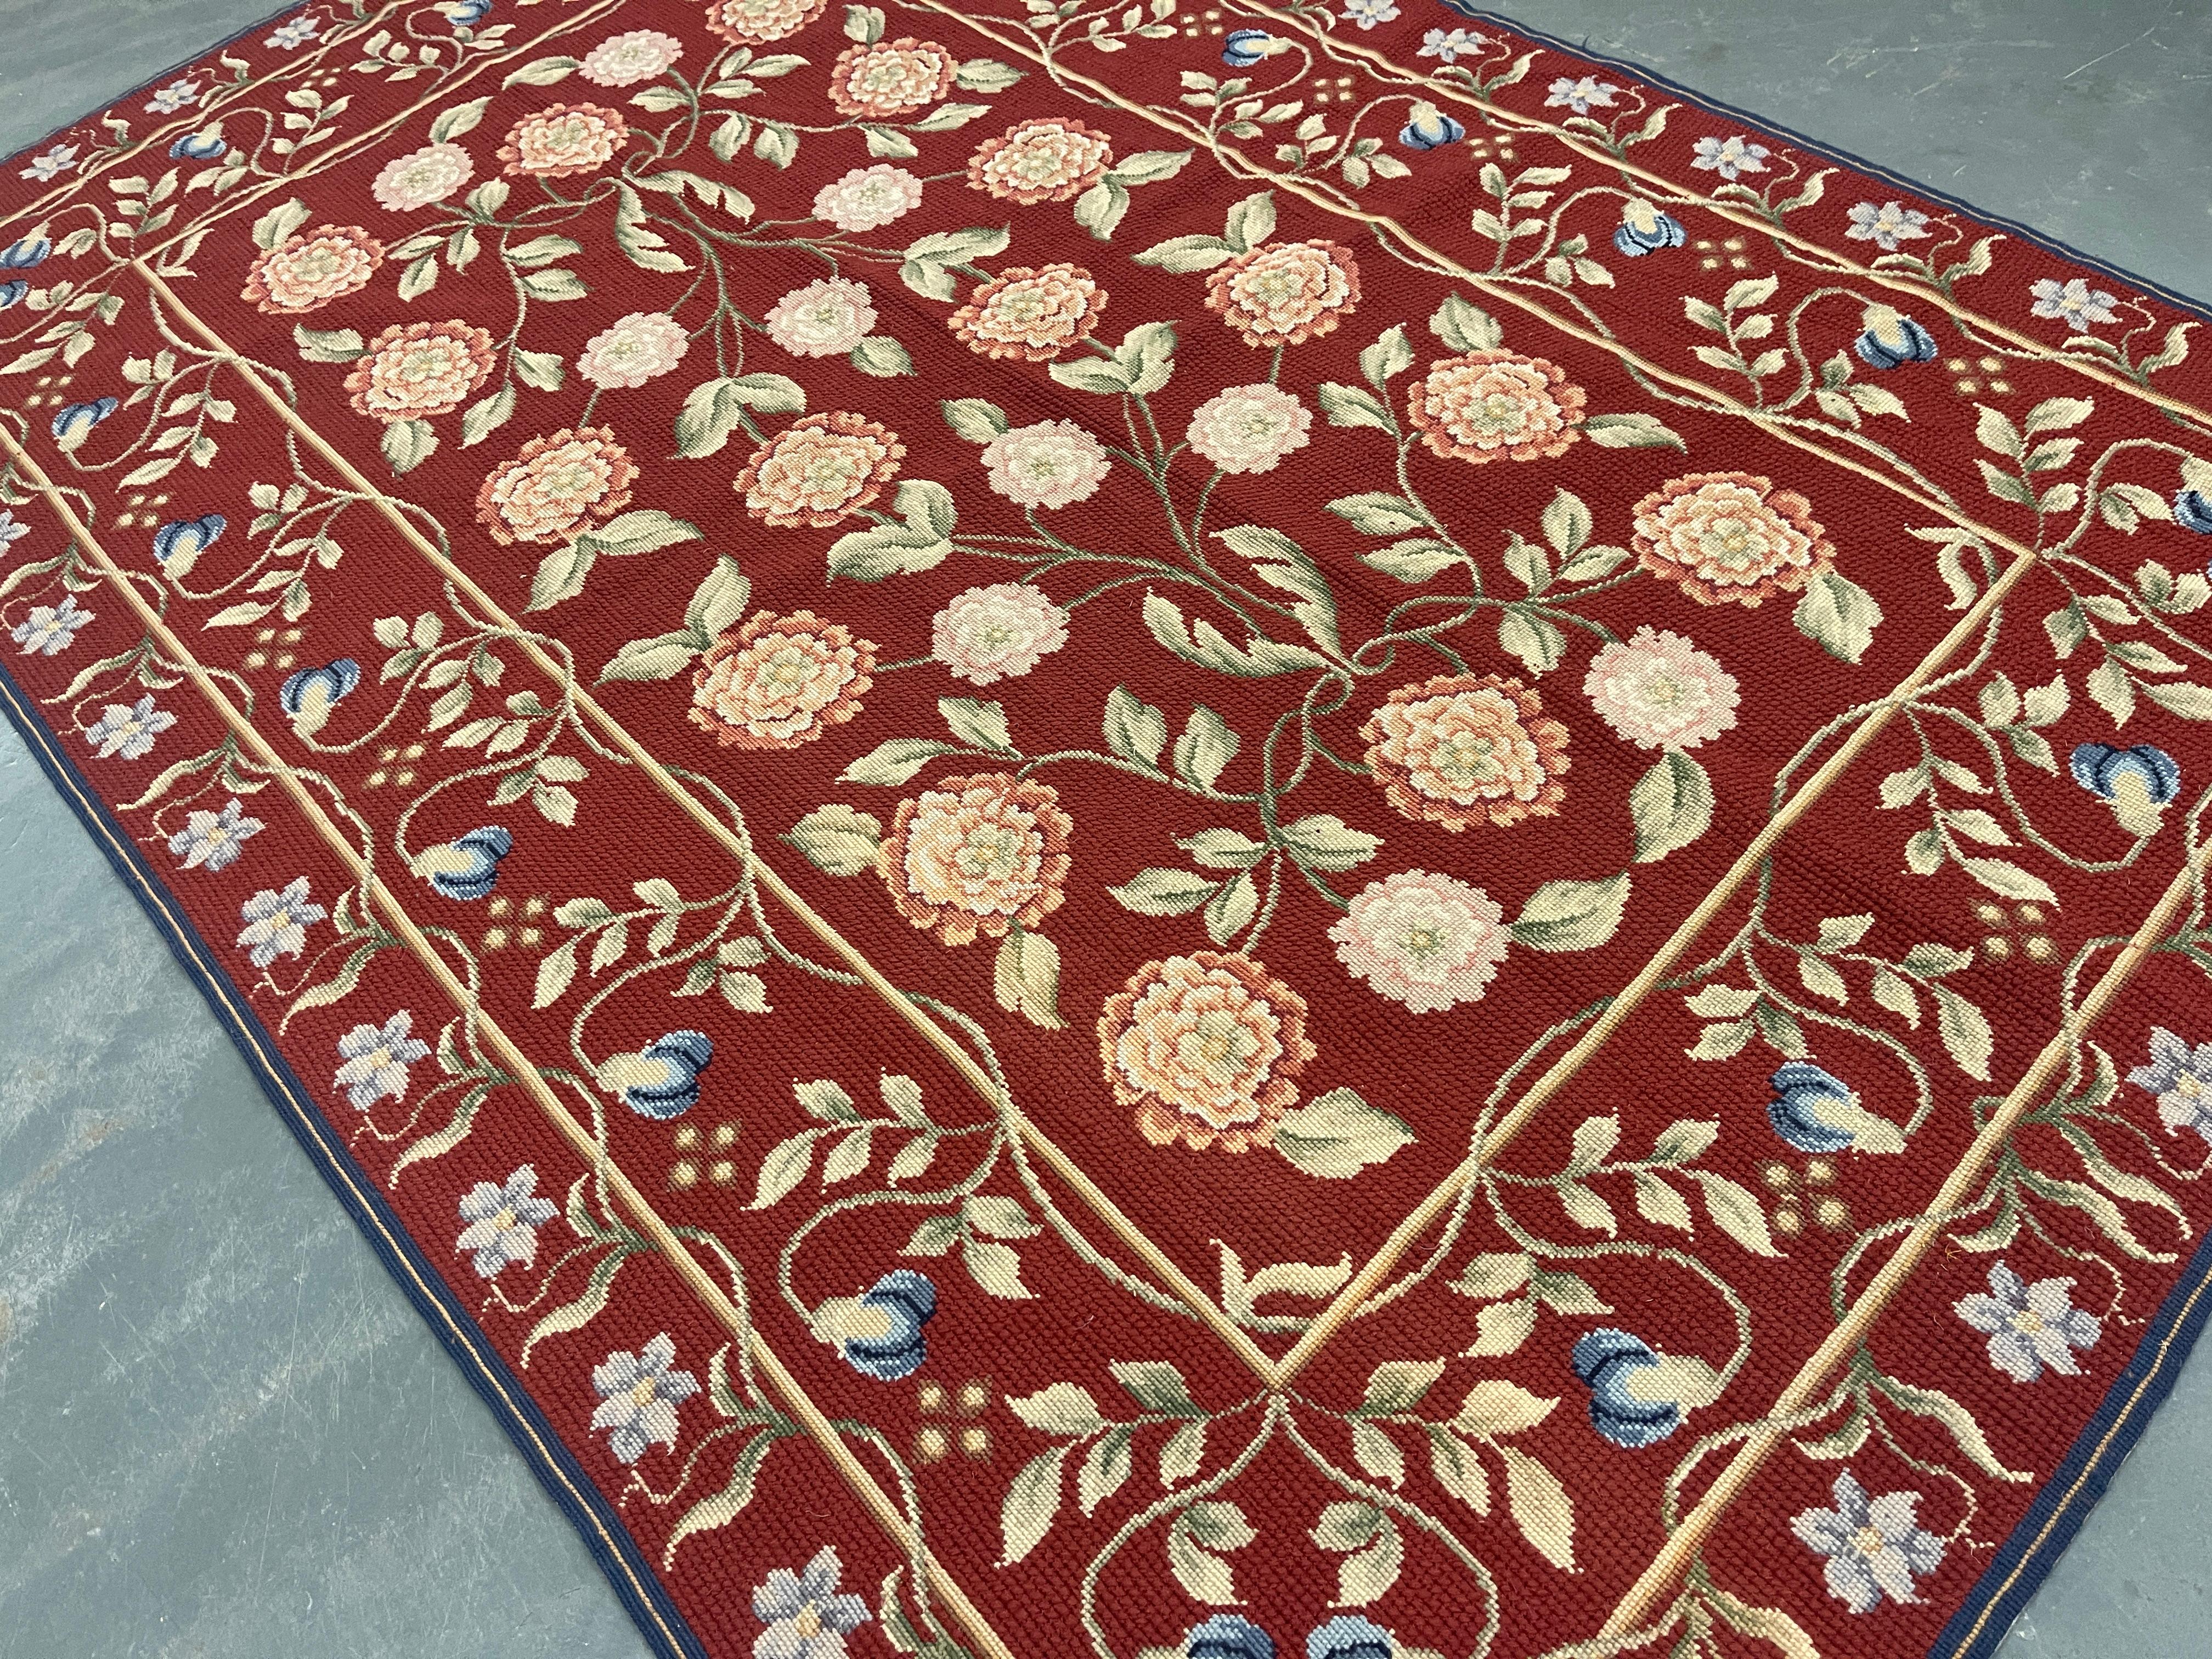 This fantastic area rug has been handwoven with a beautiful symmetrical floral design woven on a rich wine-red background with accents of cream-green and ivory. This elegant piece's colour and design make it the perfect accent rug.
This style of